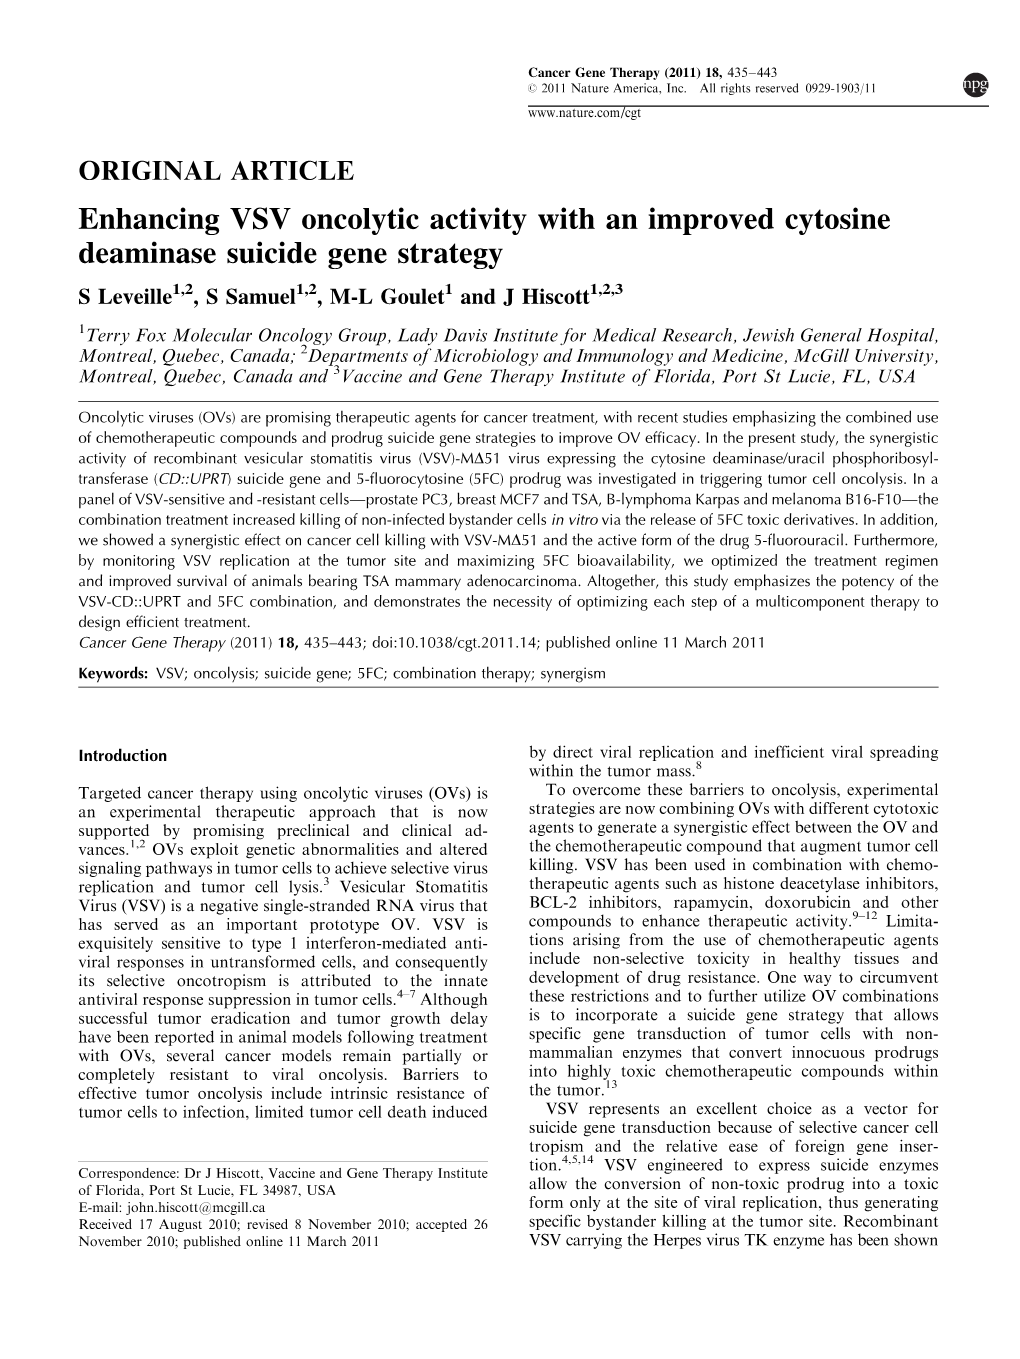 Enhancing VSV Oncolytic Activity with an Improved Cytosine Deaminase